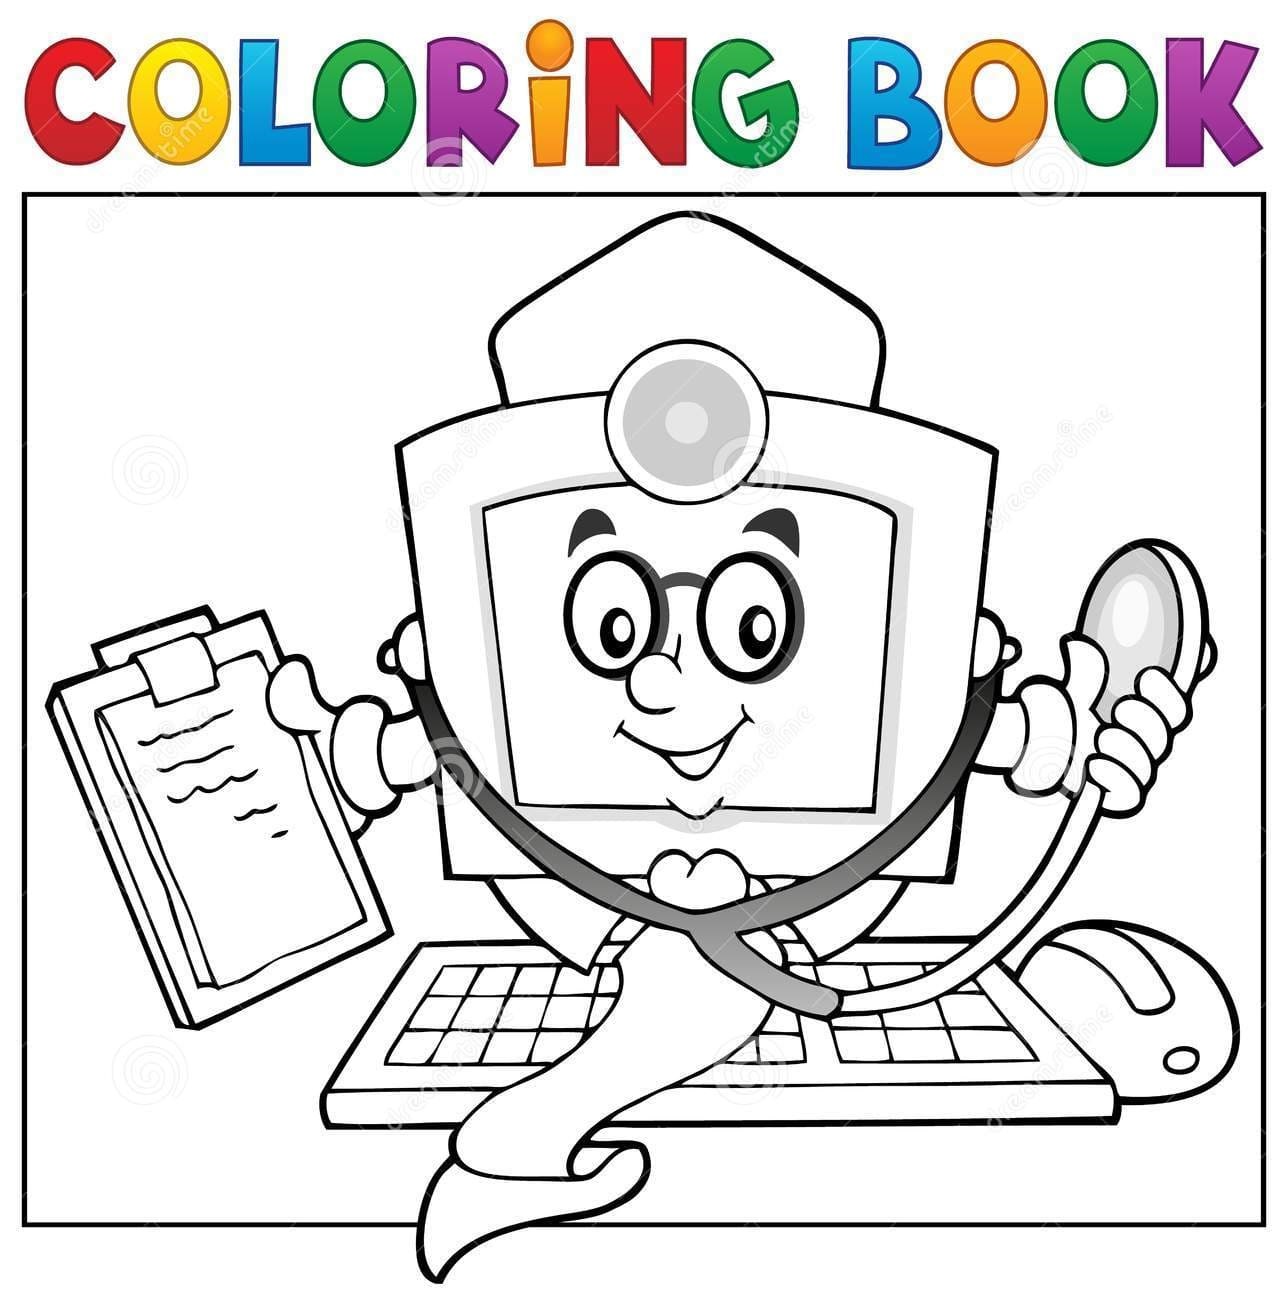 Coloring book computer doctor theme